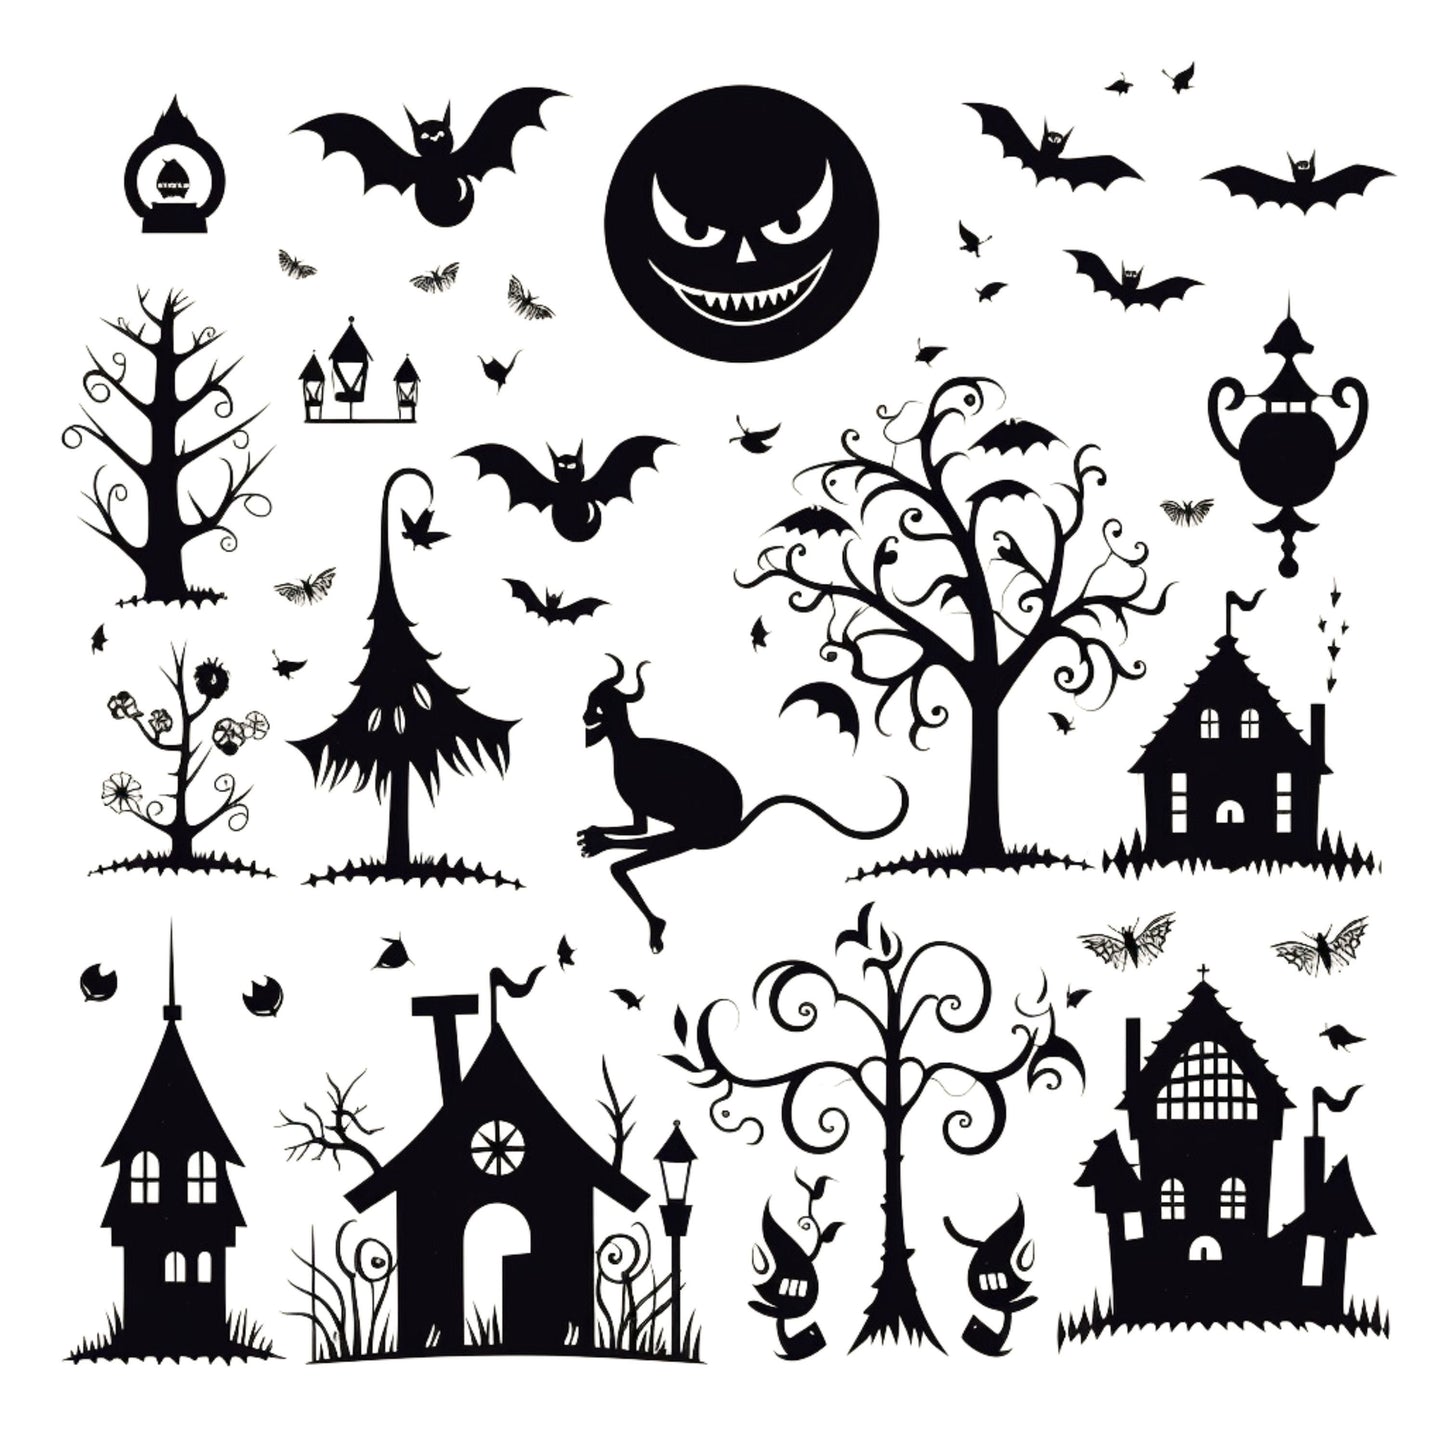 Unleash your creativity with our Cricut Halloween SVG bundle! Craft eerie t-shirts, favor boxes, signs, and more. Ideal for all your project